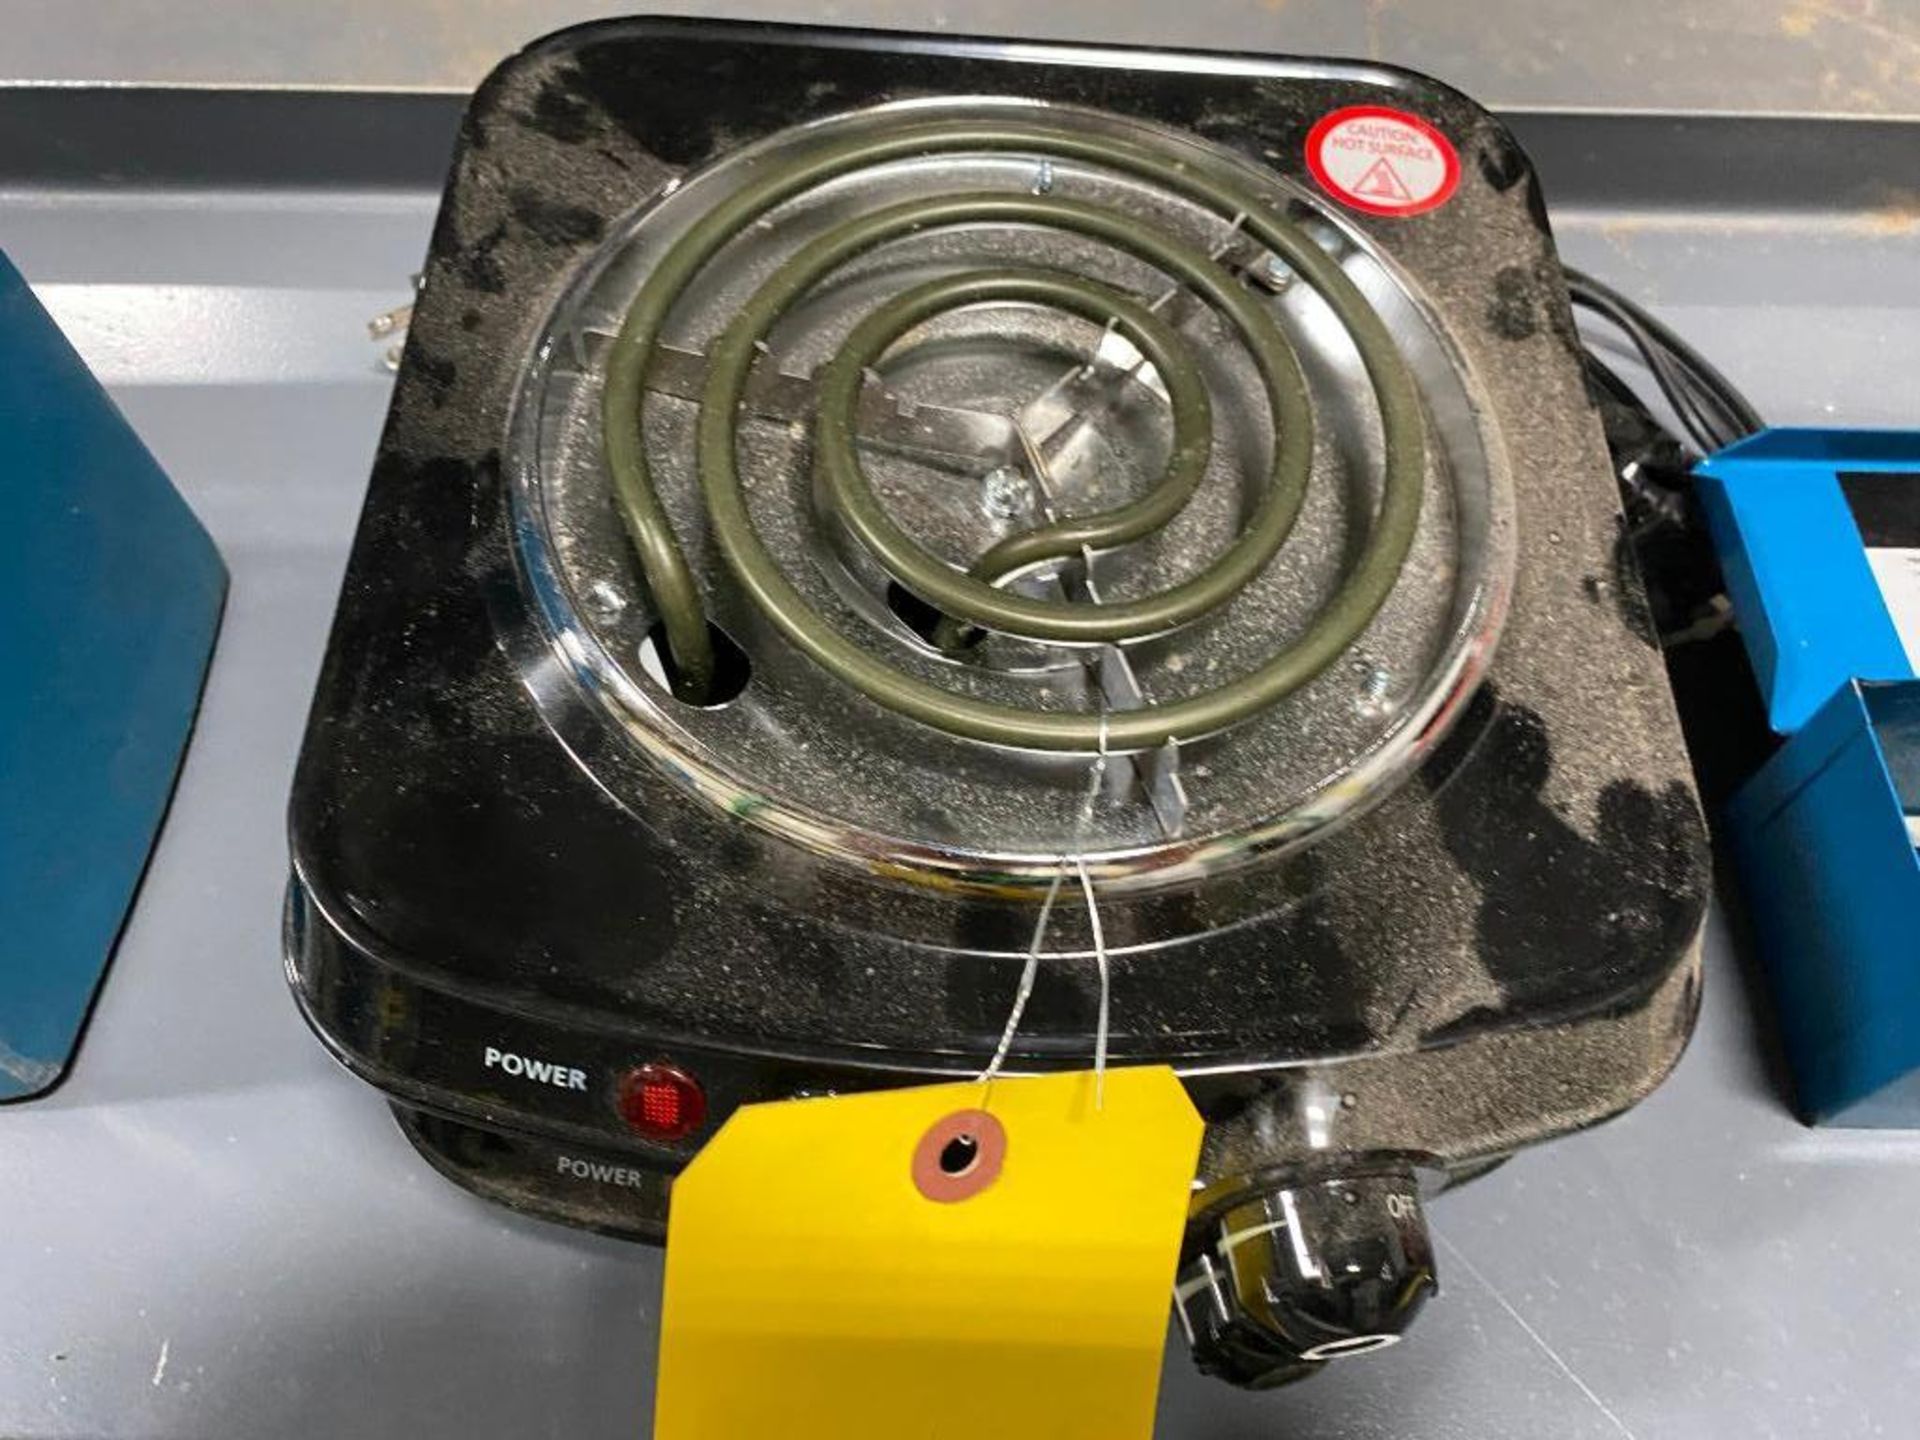 (2) Hot Plates Used as Bearing Heaters